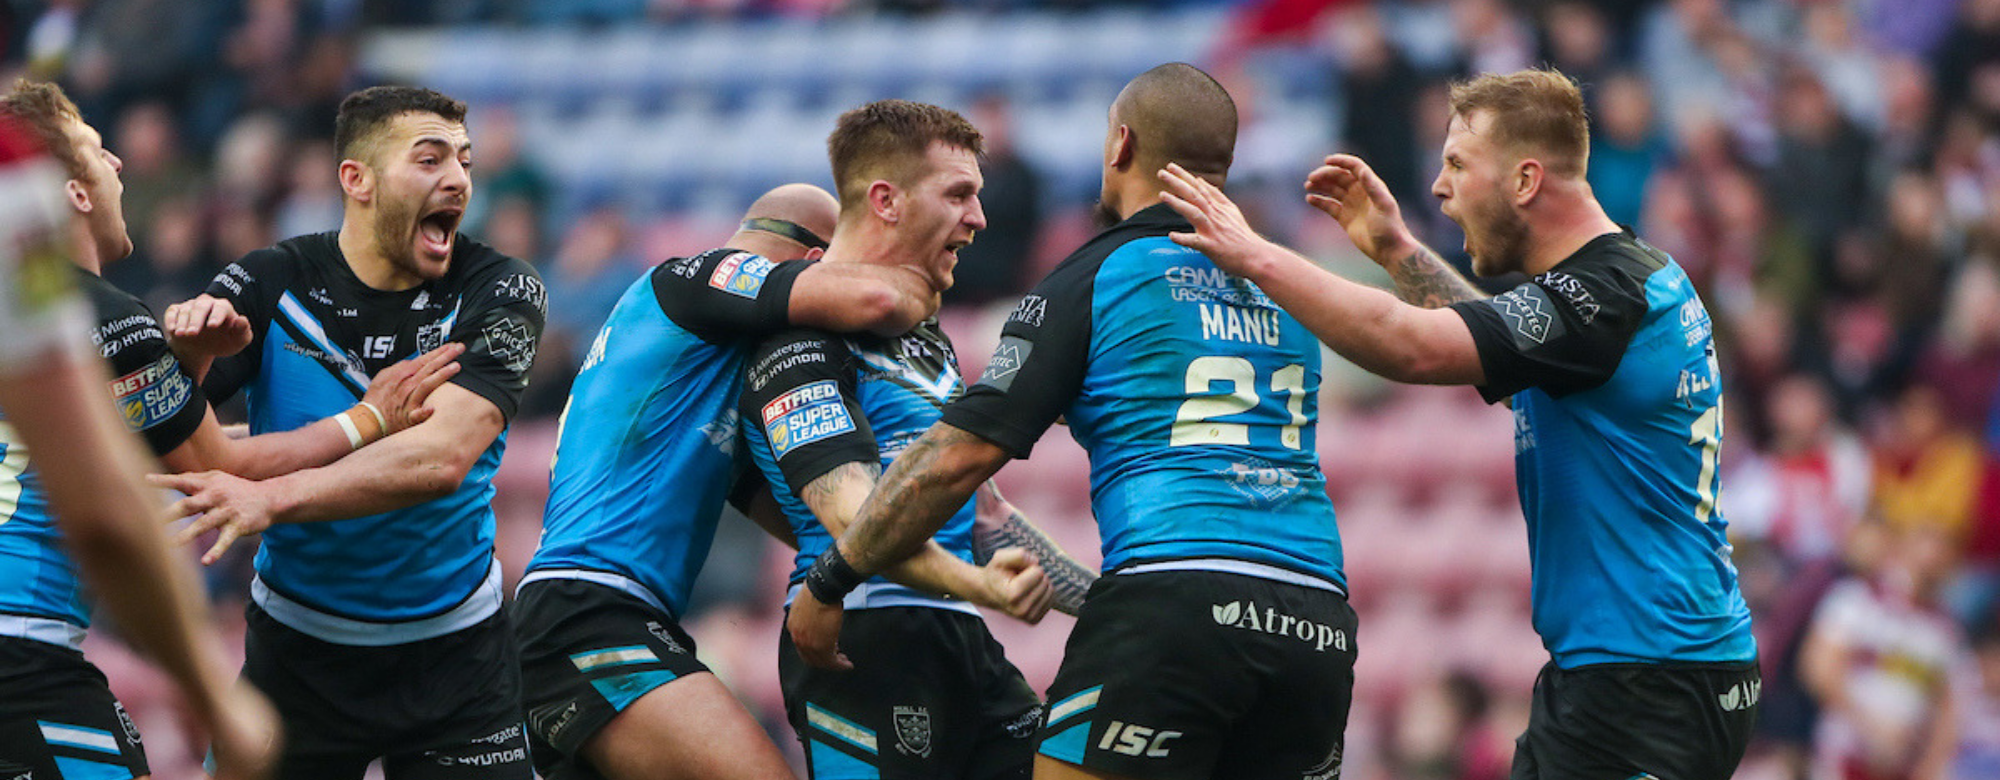 Sneyd Drop-Goal Snatches Dramatic Golden Point Victory Against Wigan